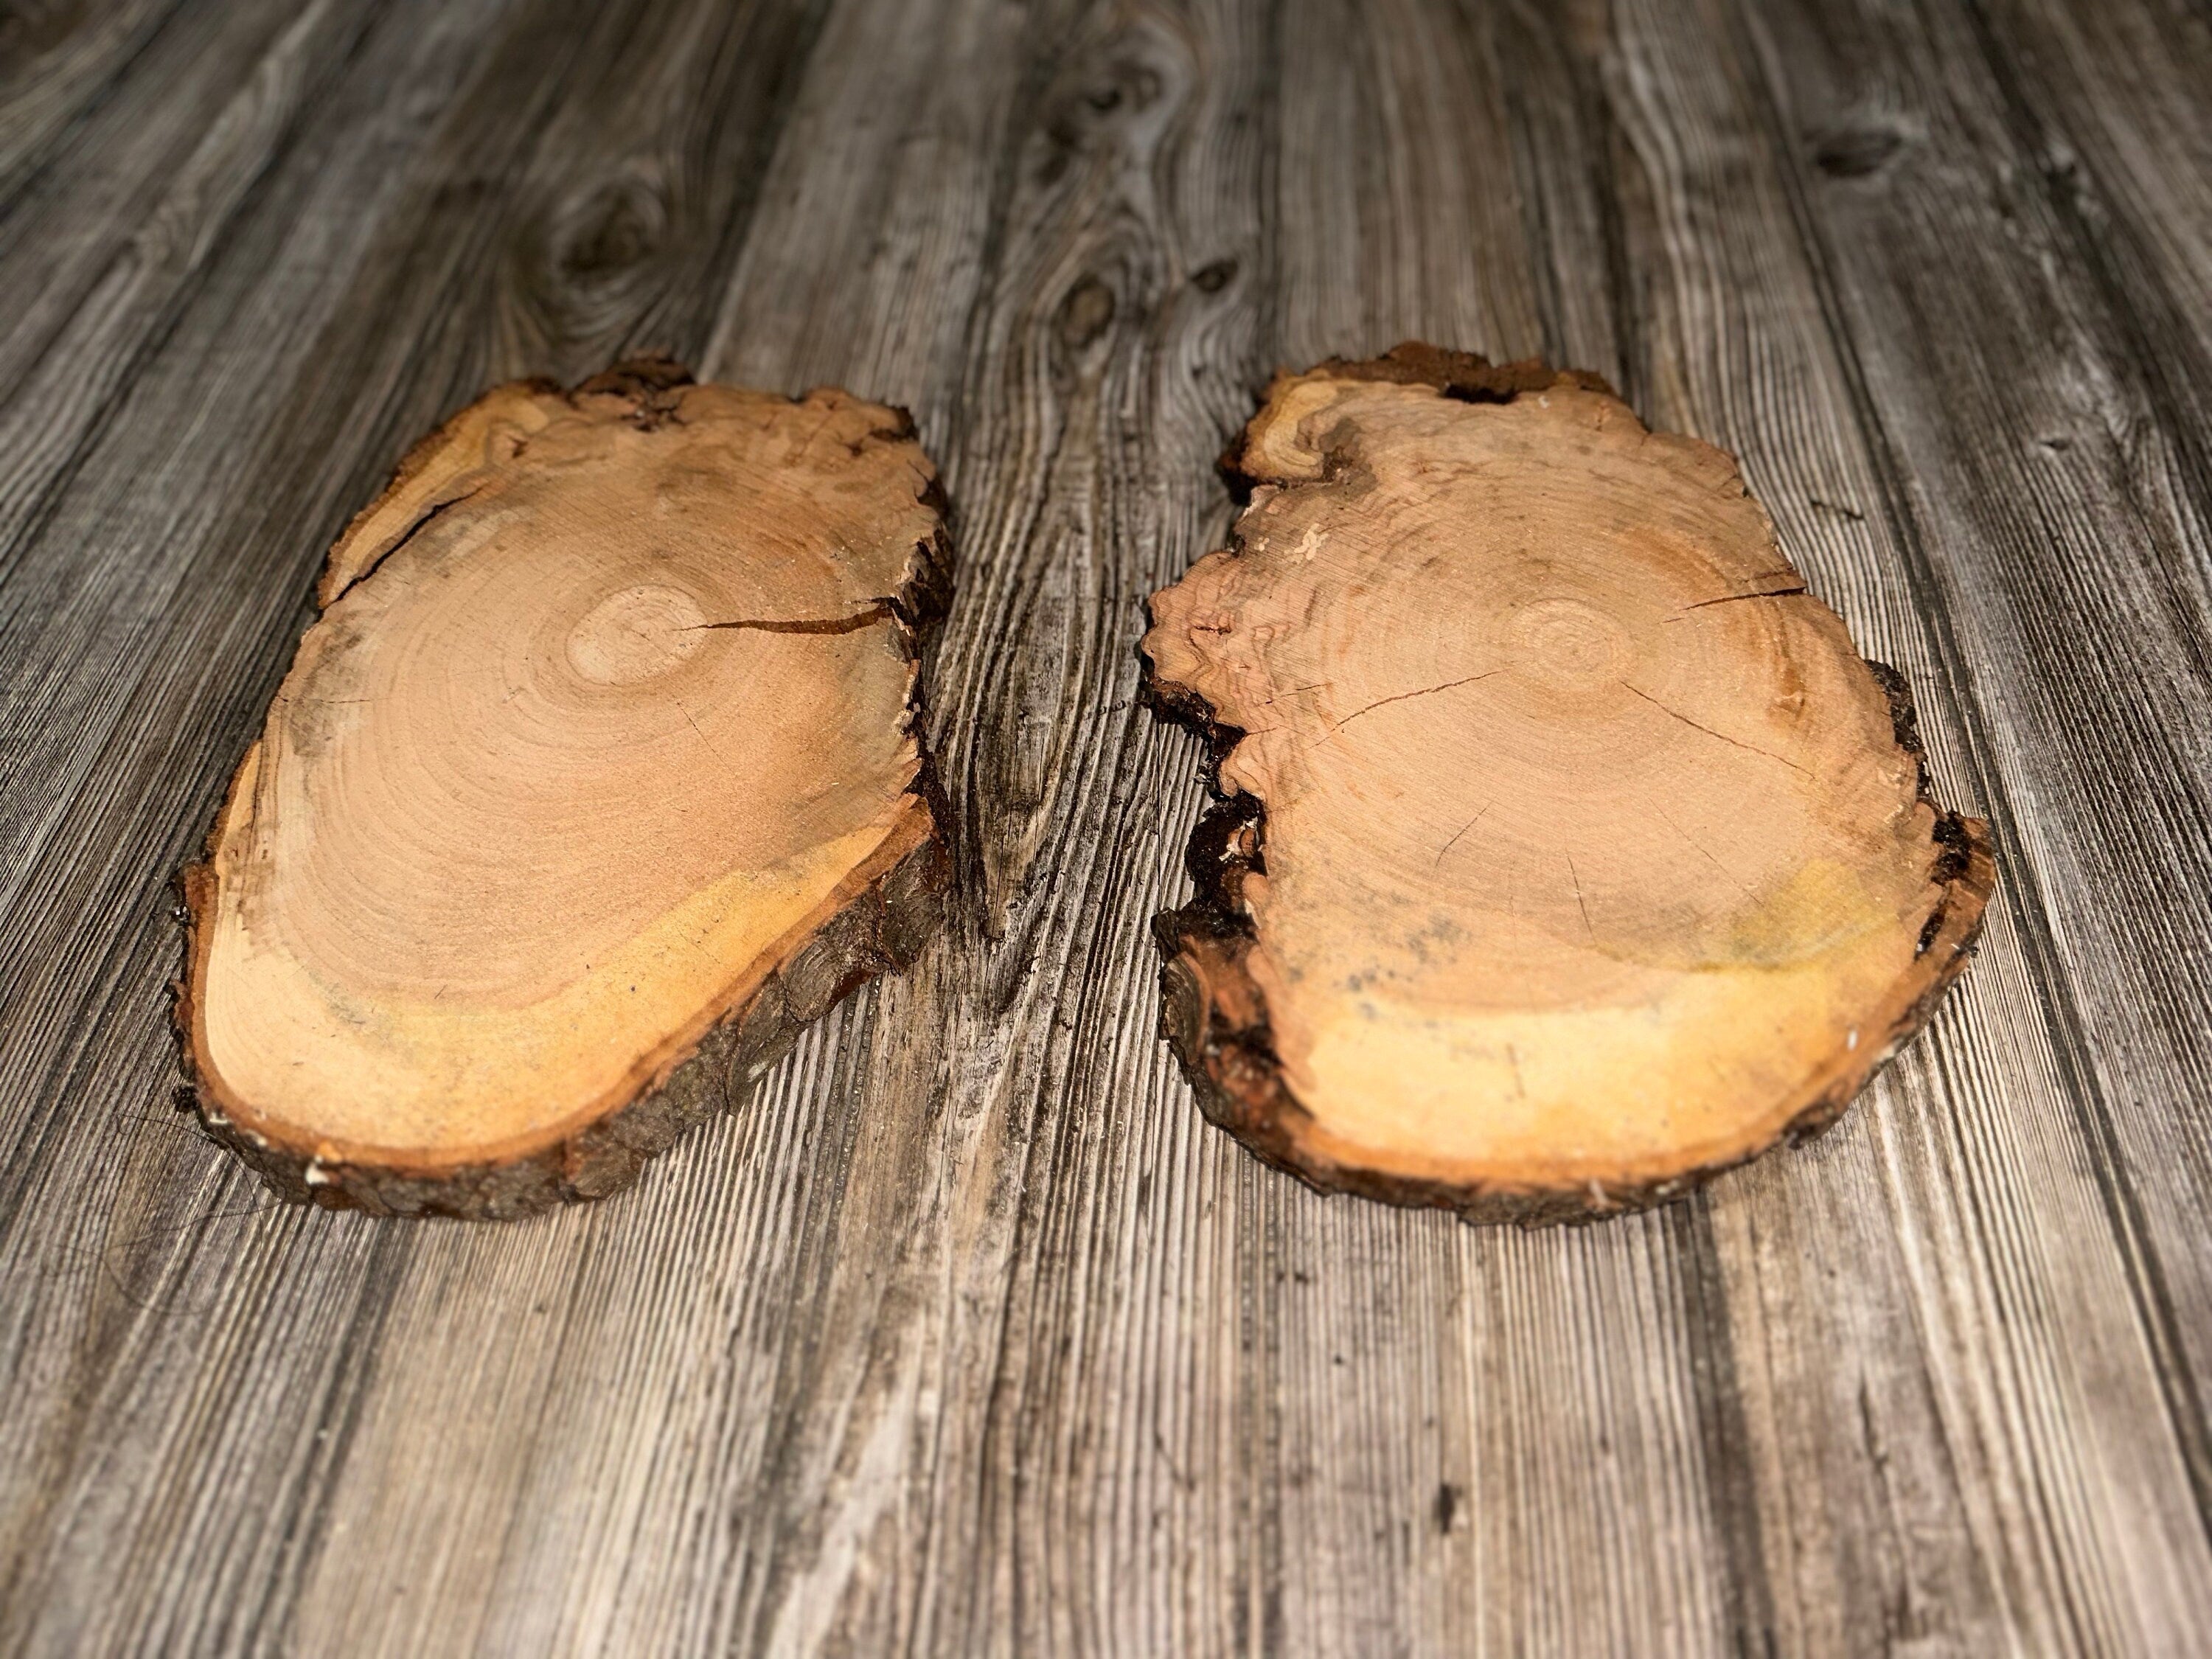 Two Cherry Burl Slices, Approximately 11.5 Inches Long by 7.5-8 Inches Wide and 1 Inch Thick